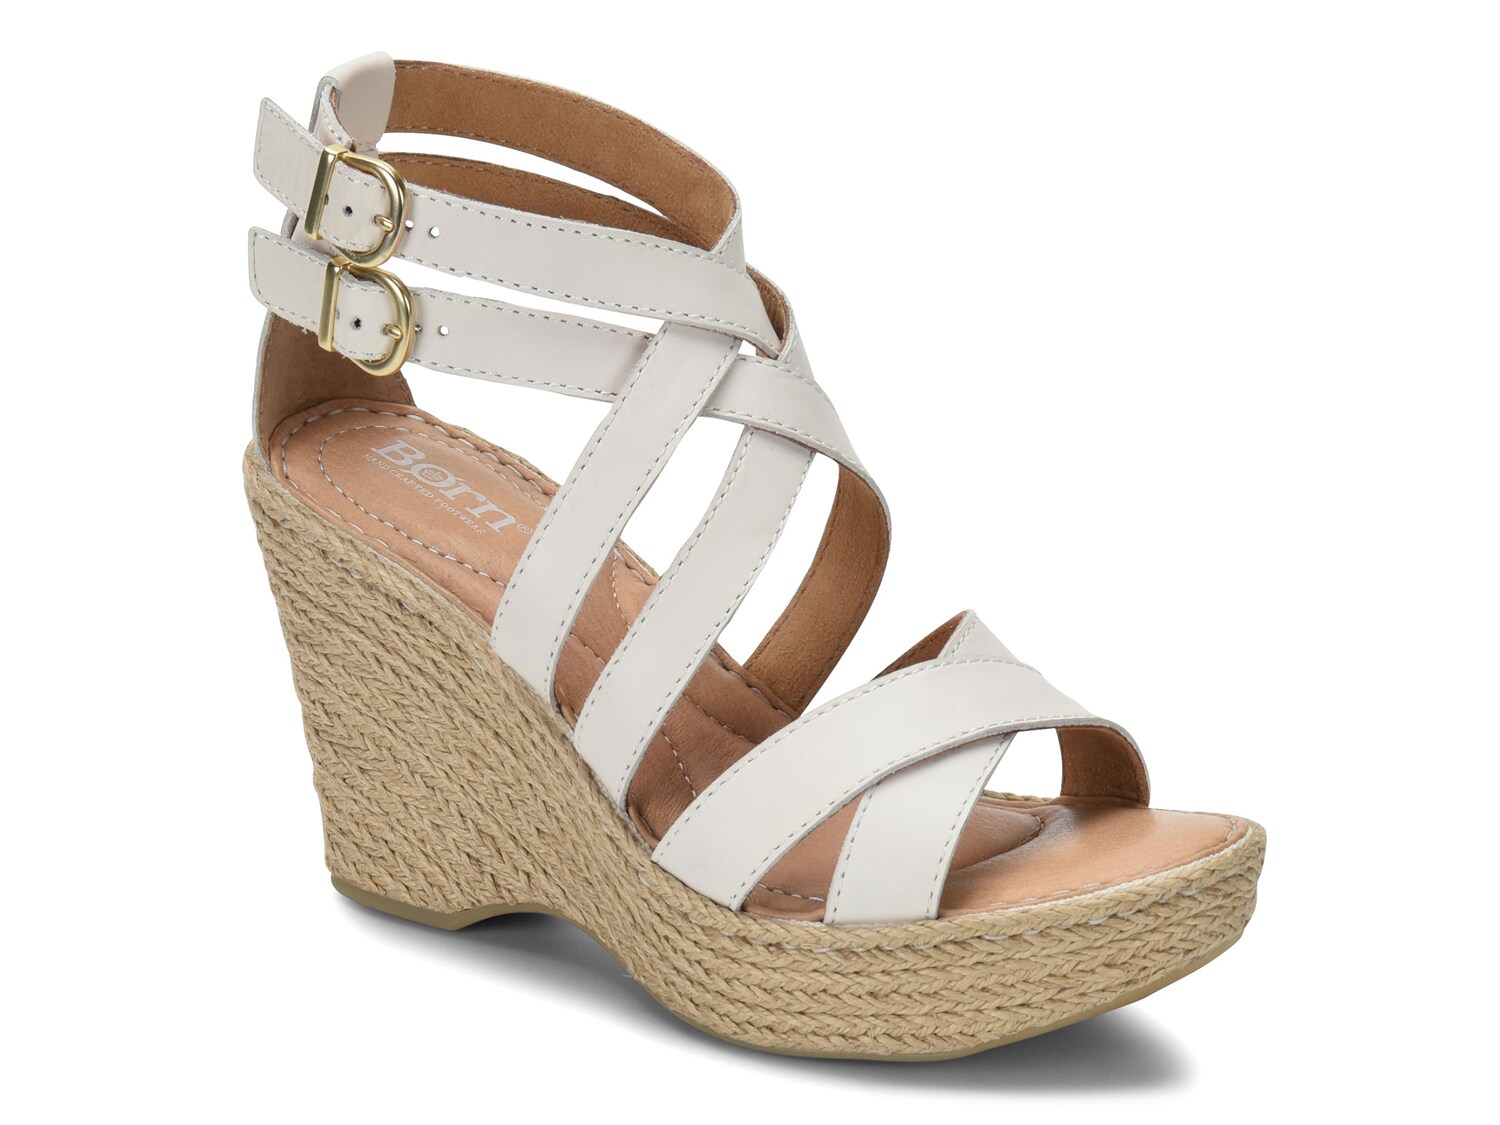 Born Sultry Wedge Sandal Women's Shoes 